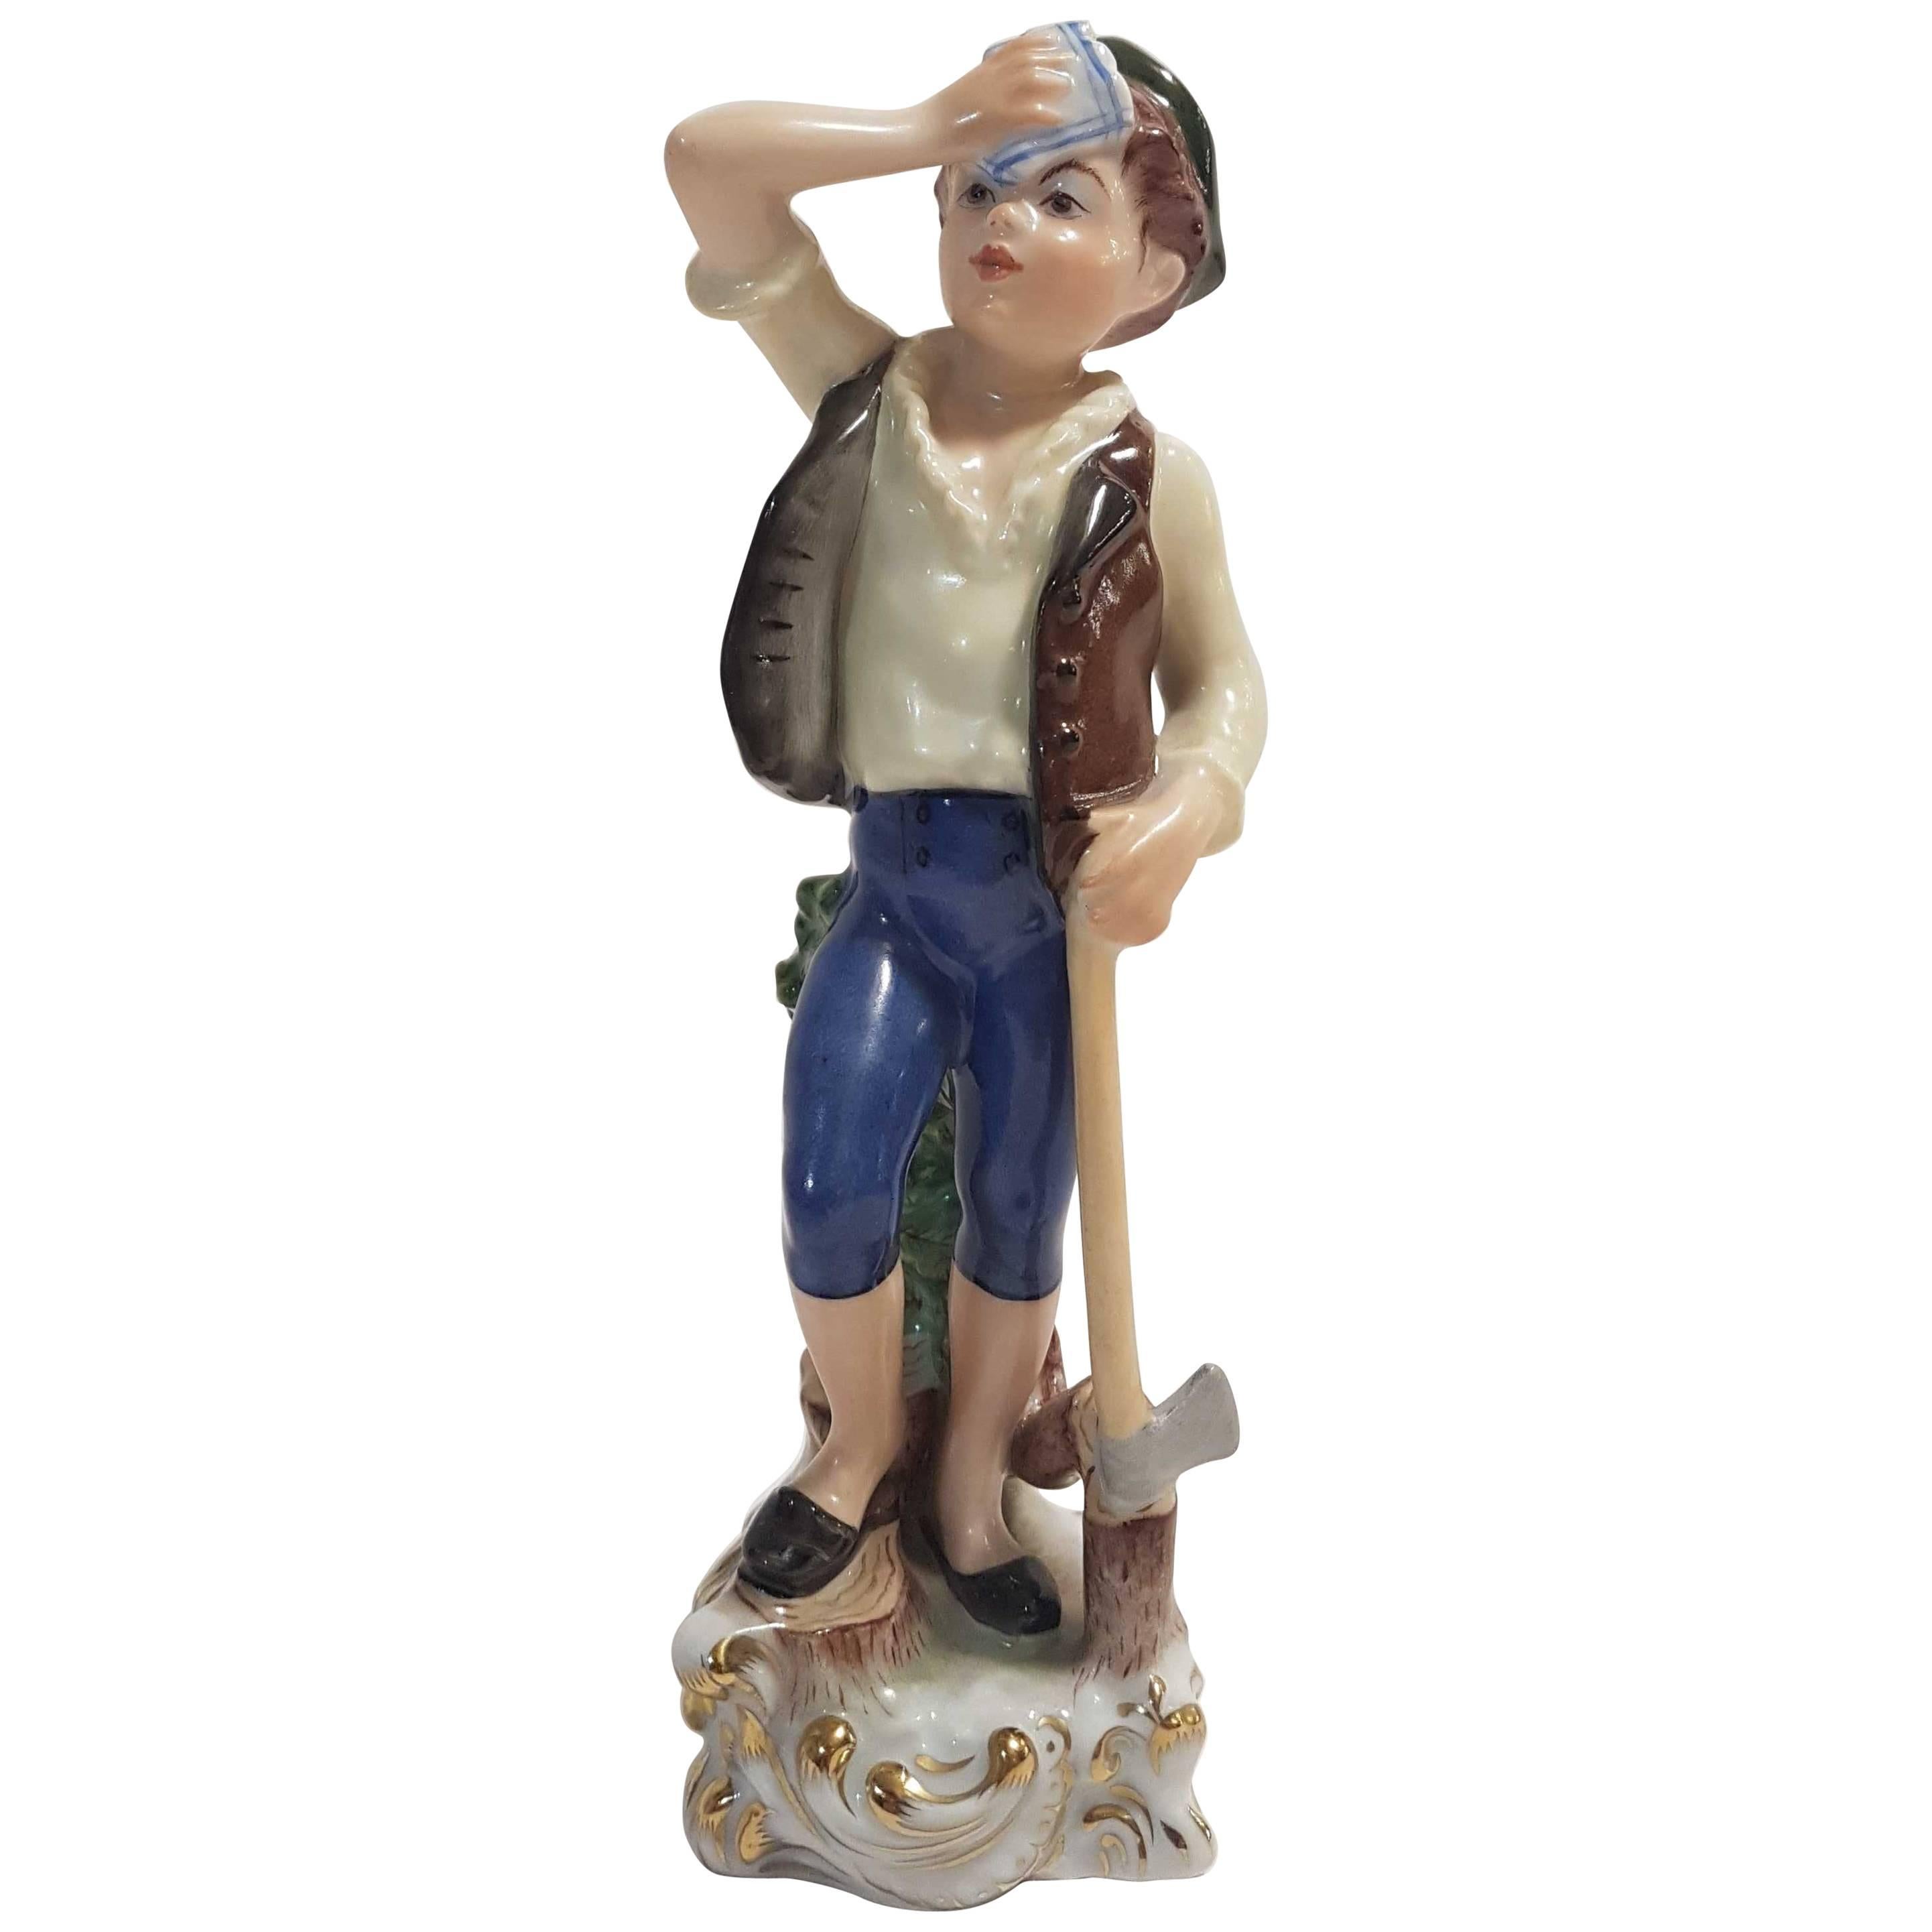 Herend Hand-Painted Hungarian Porcelain Figurine Representing a Woodcutter